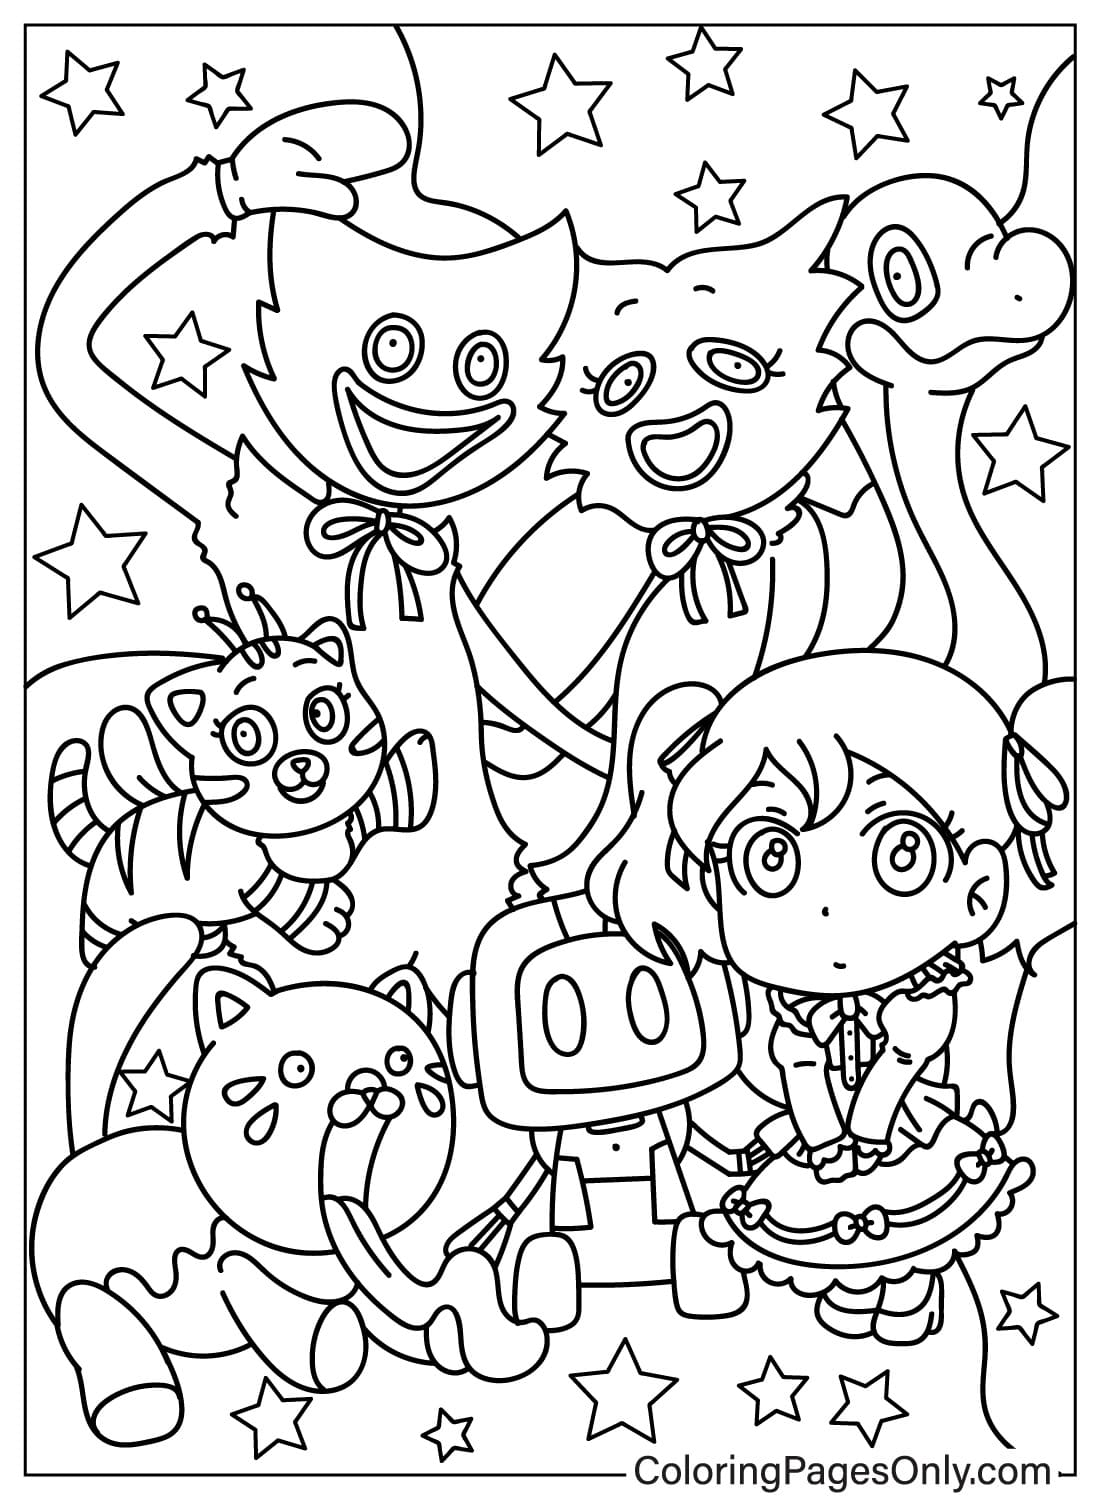 Images Poppy Playtime Coloring Page from Poppy Playtime